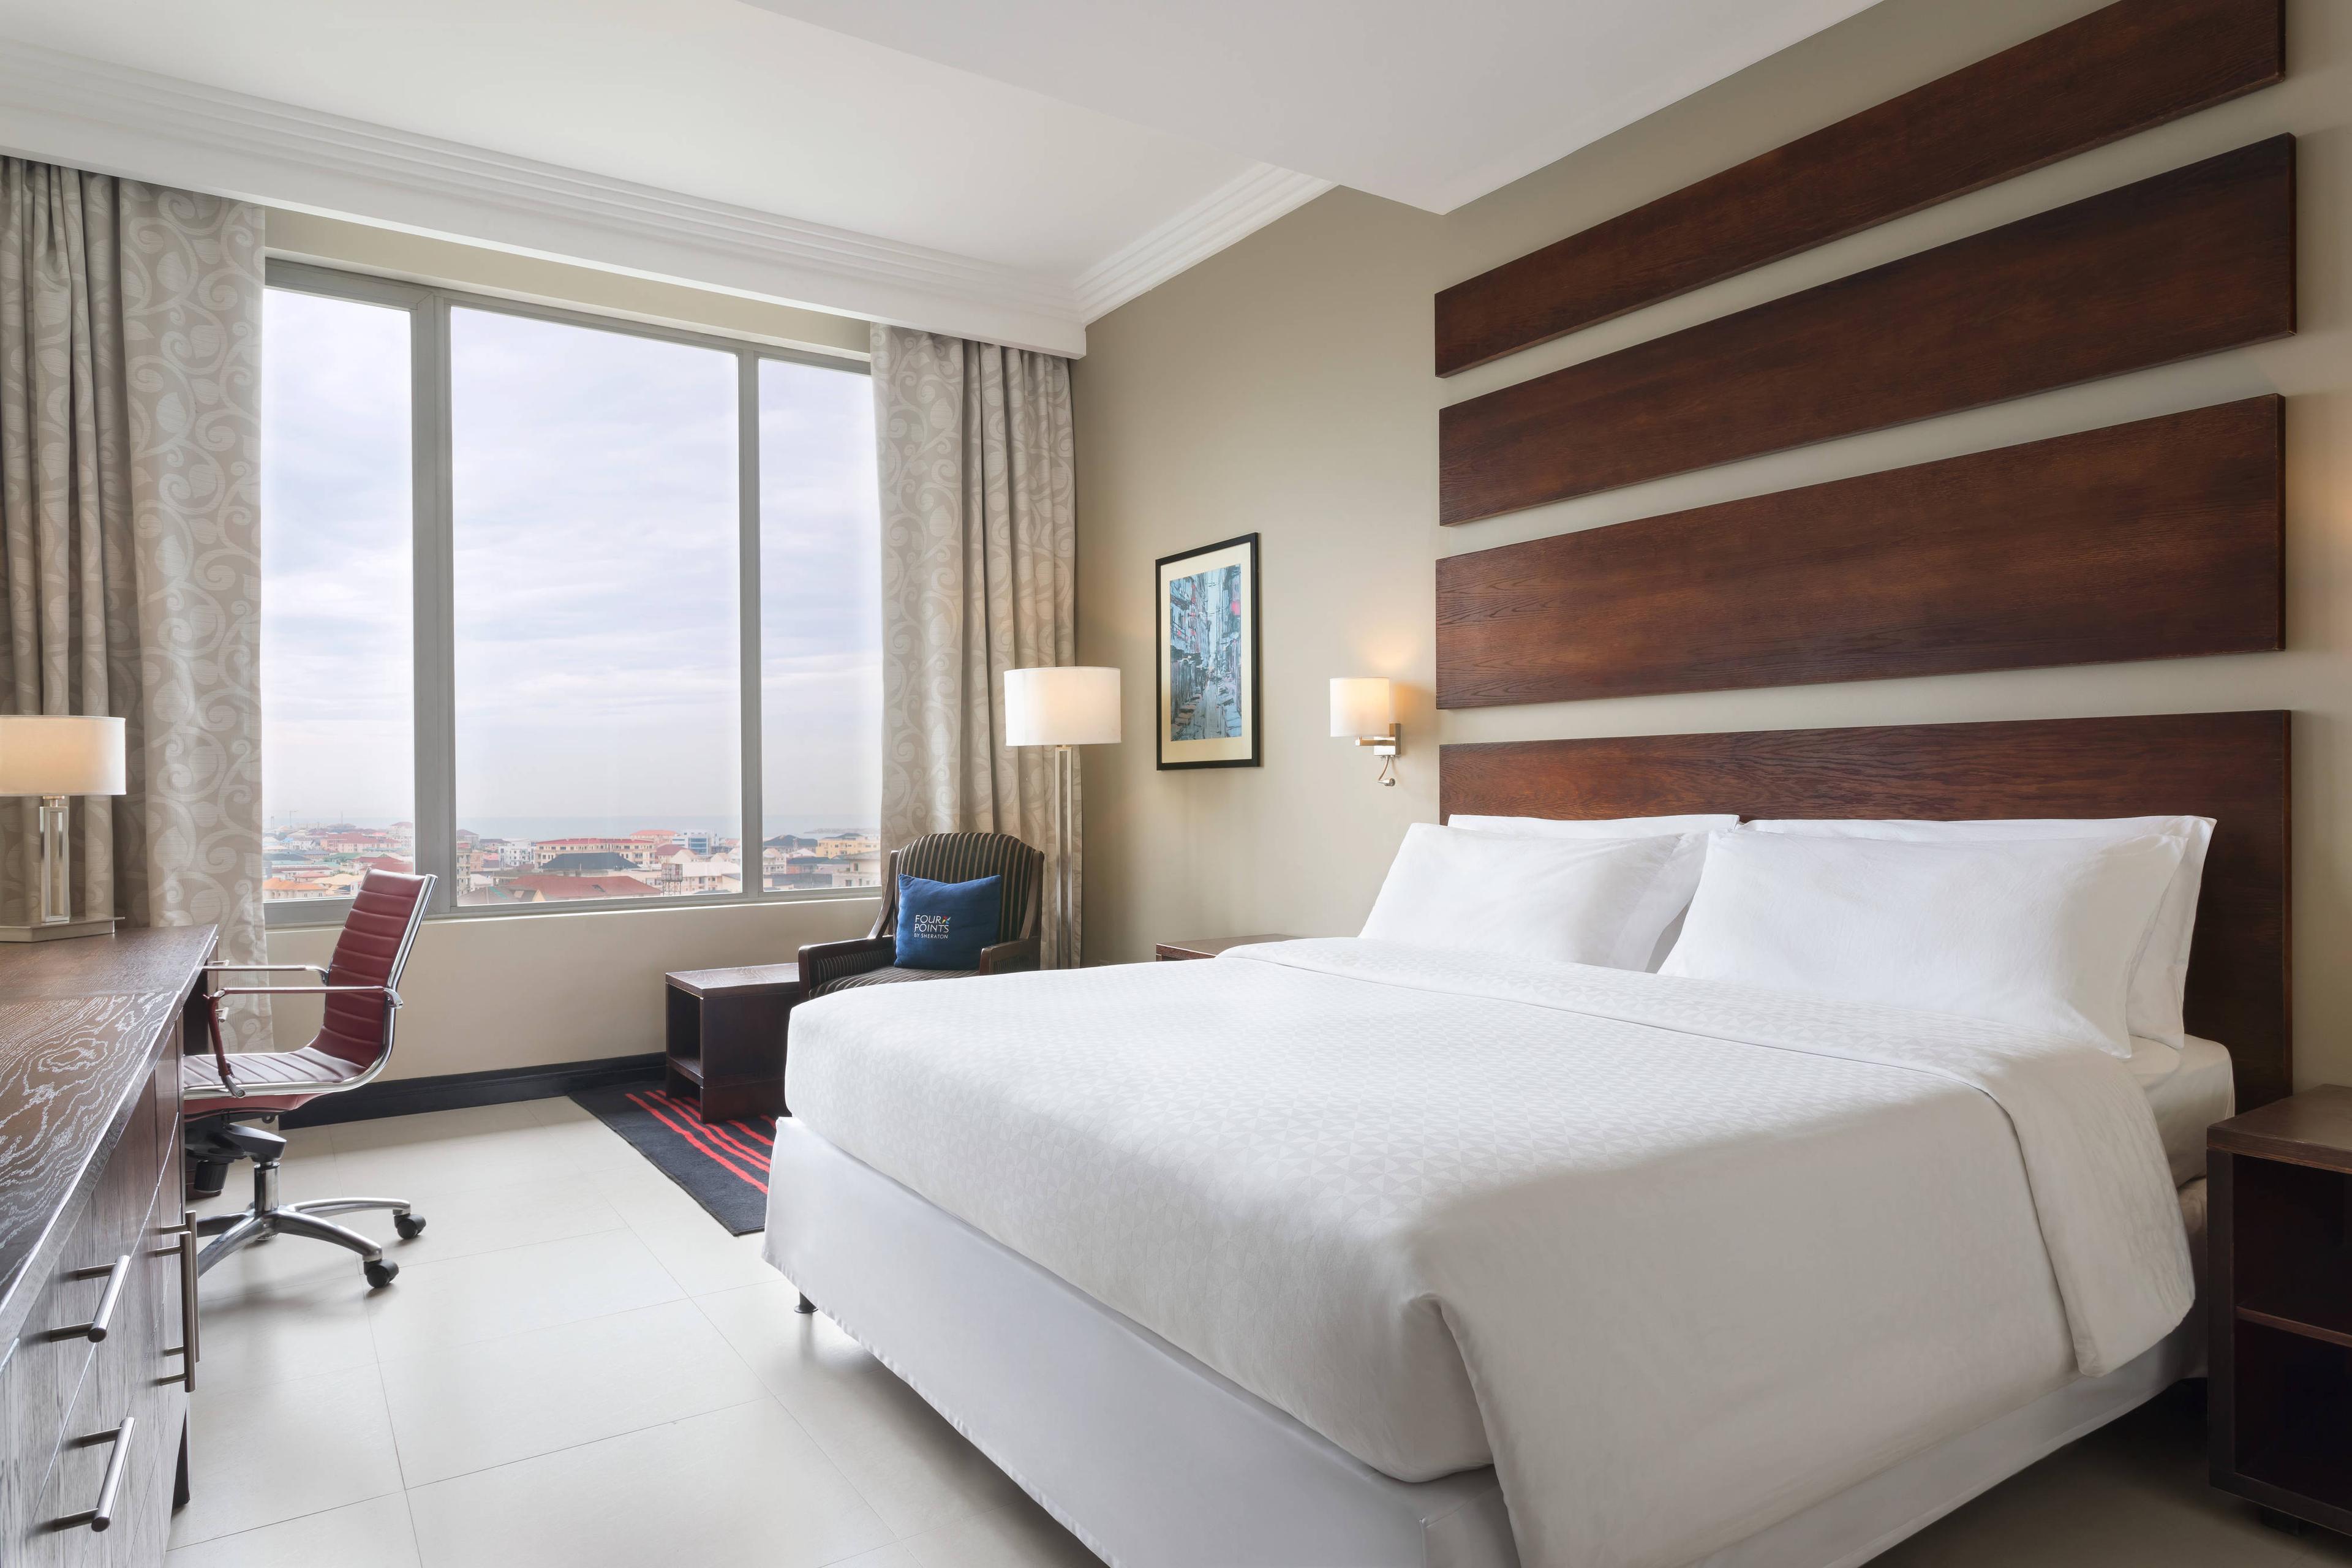 With all the amenities to make your stay enjoyable and convenient, our King Executive Guest Room are the perfect home away from home.